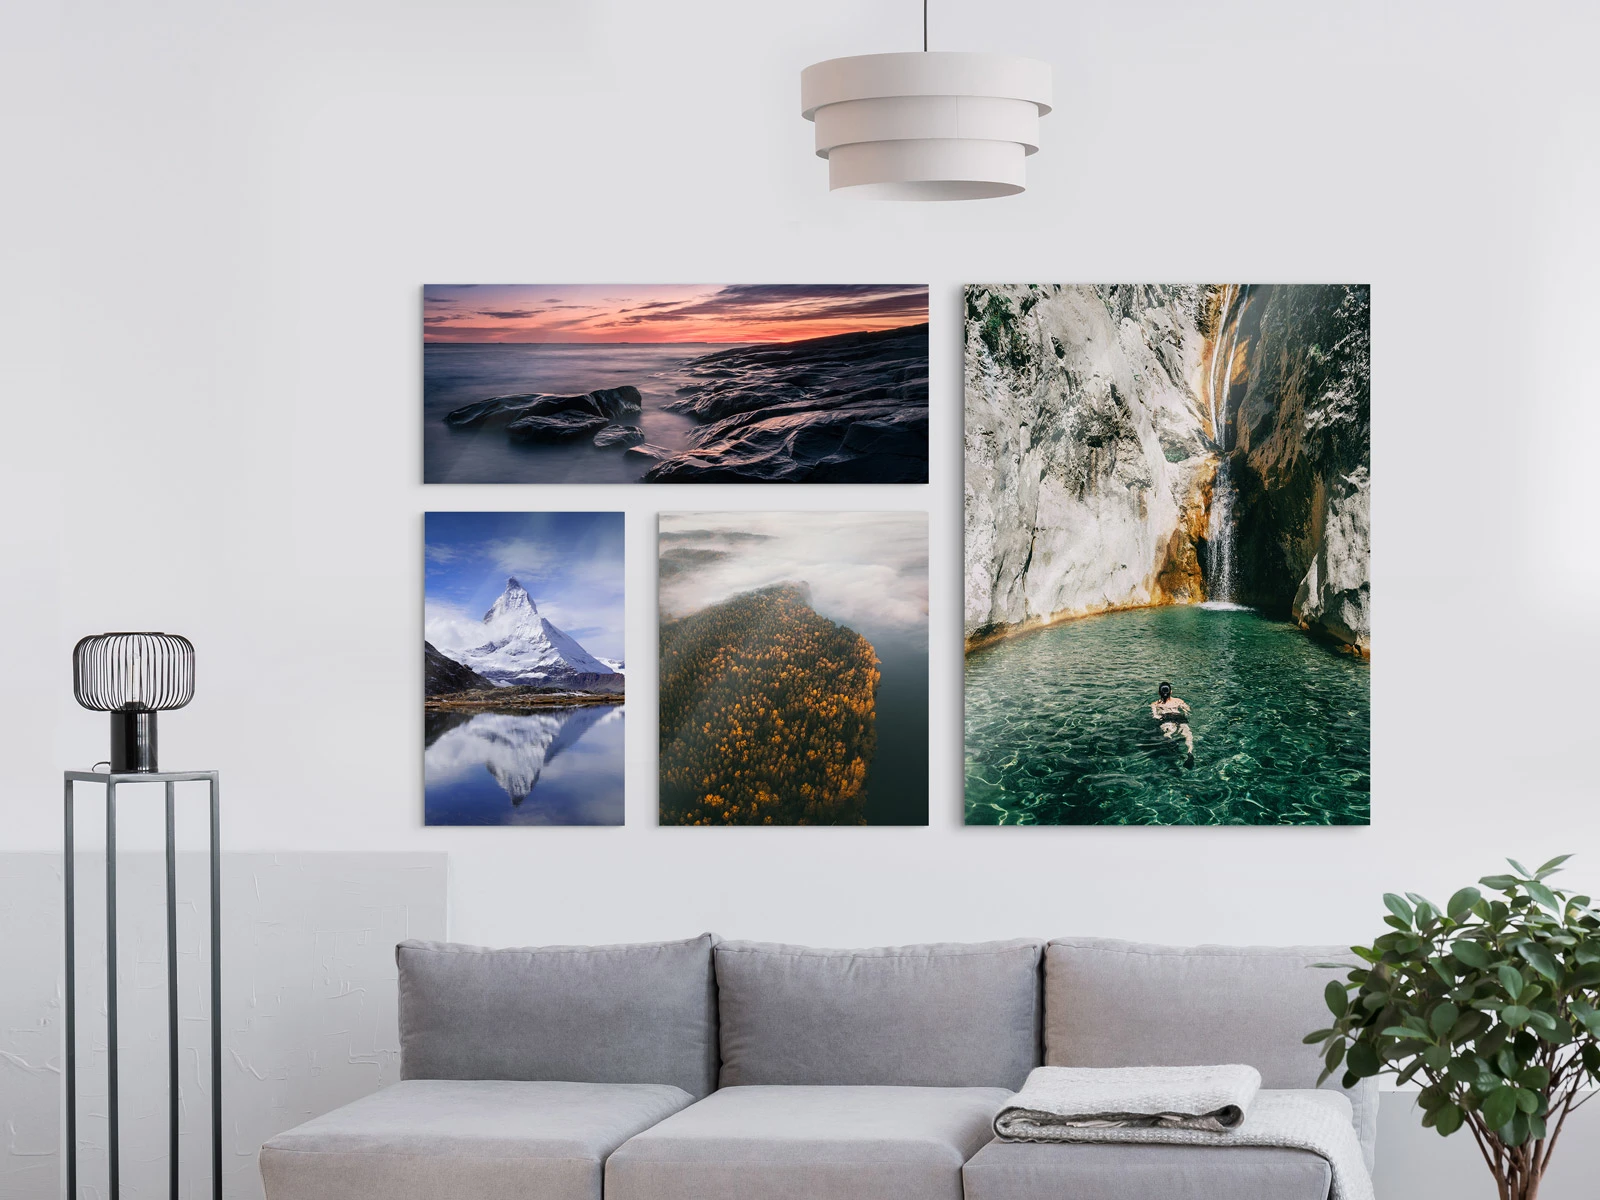 Several landscape photos on a wall as original photo print under acrylic glass.